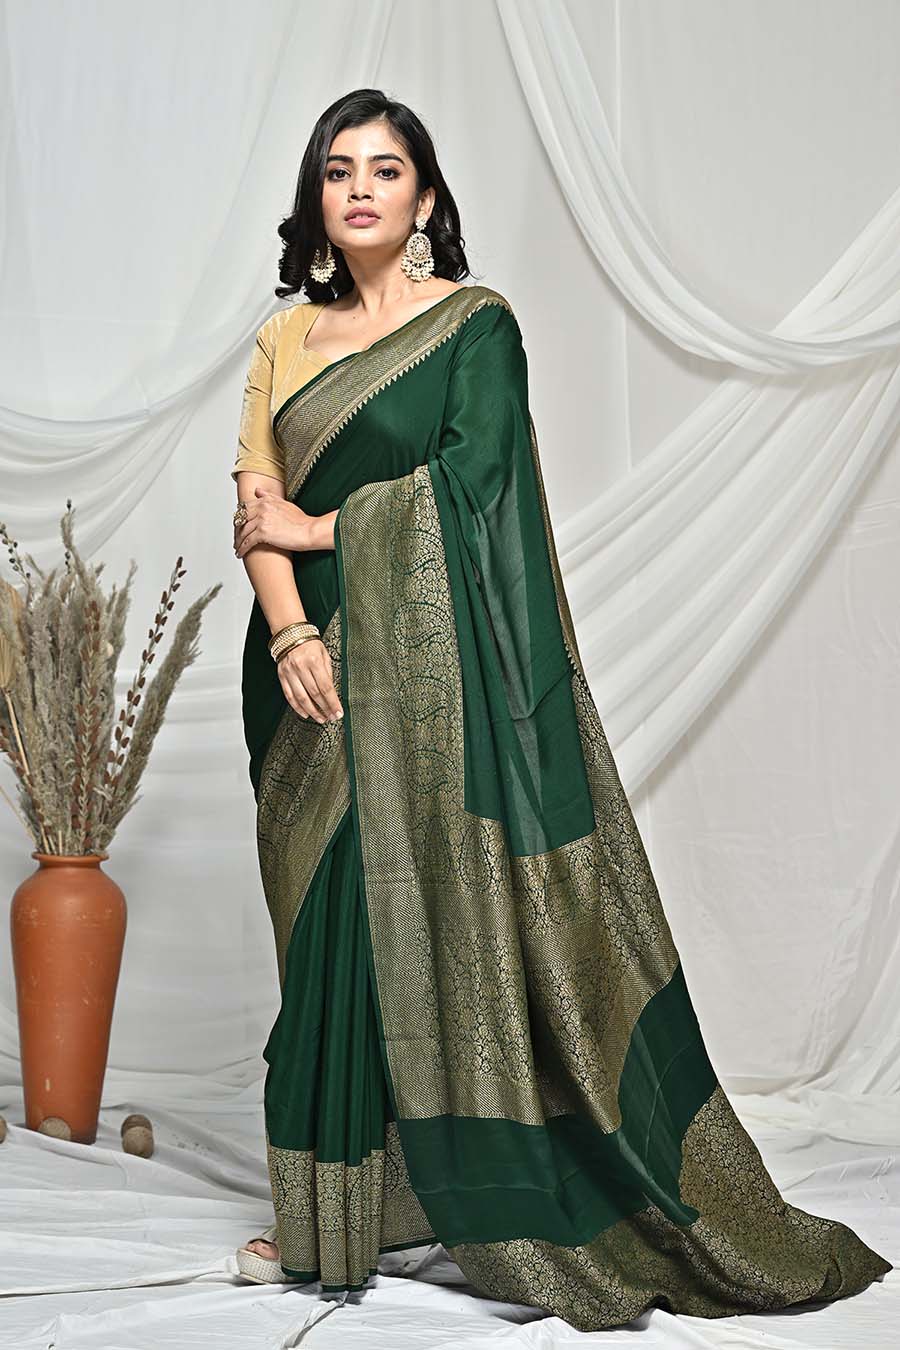 Bottle green color soft georgette saree with zari weaving work